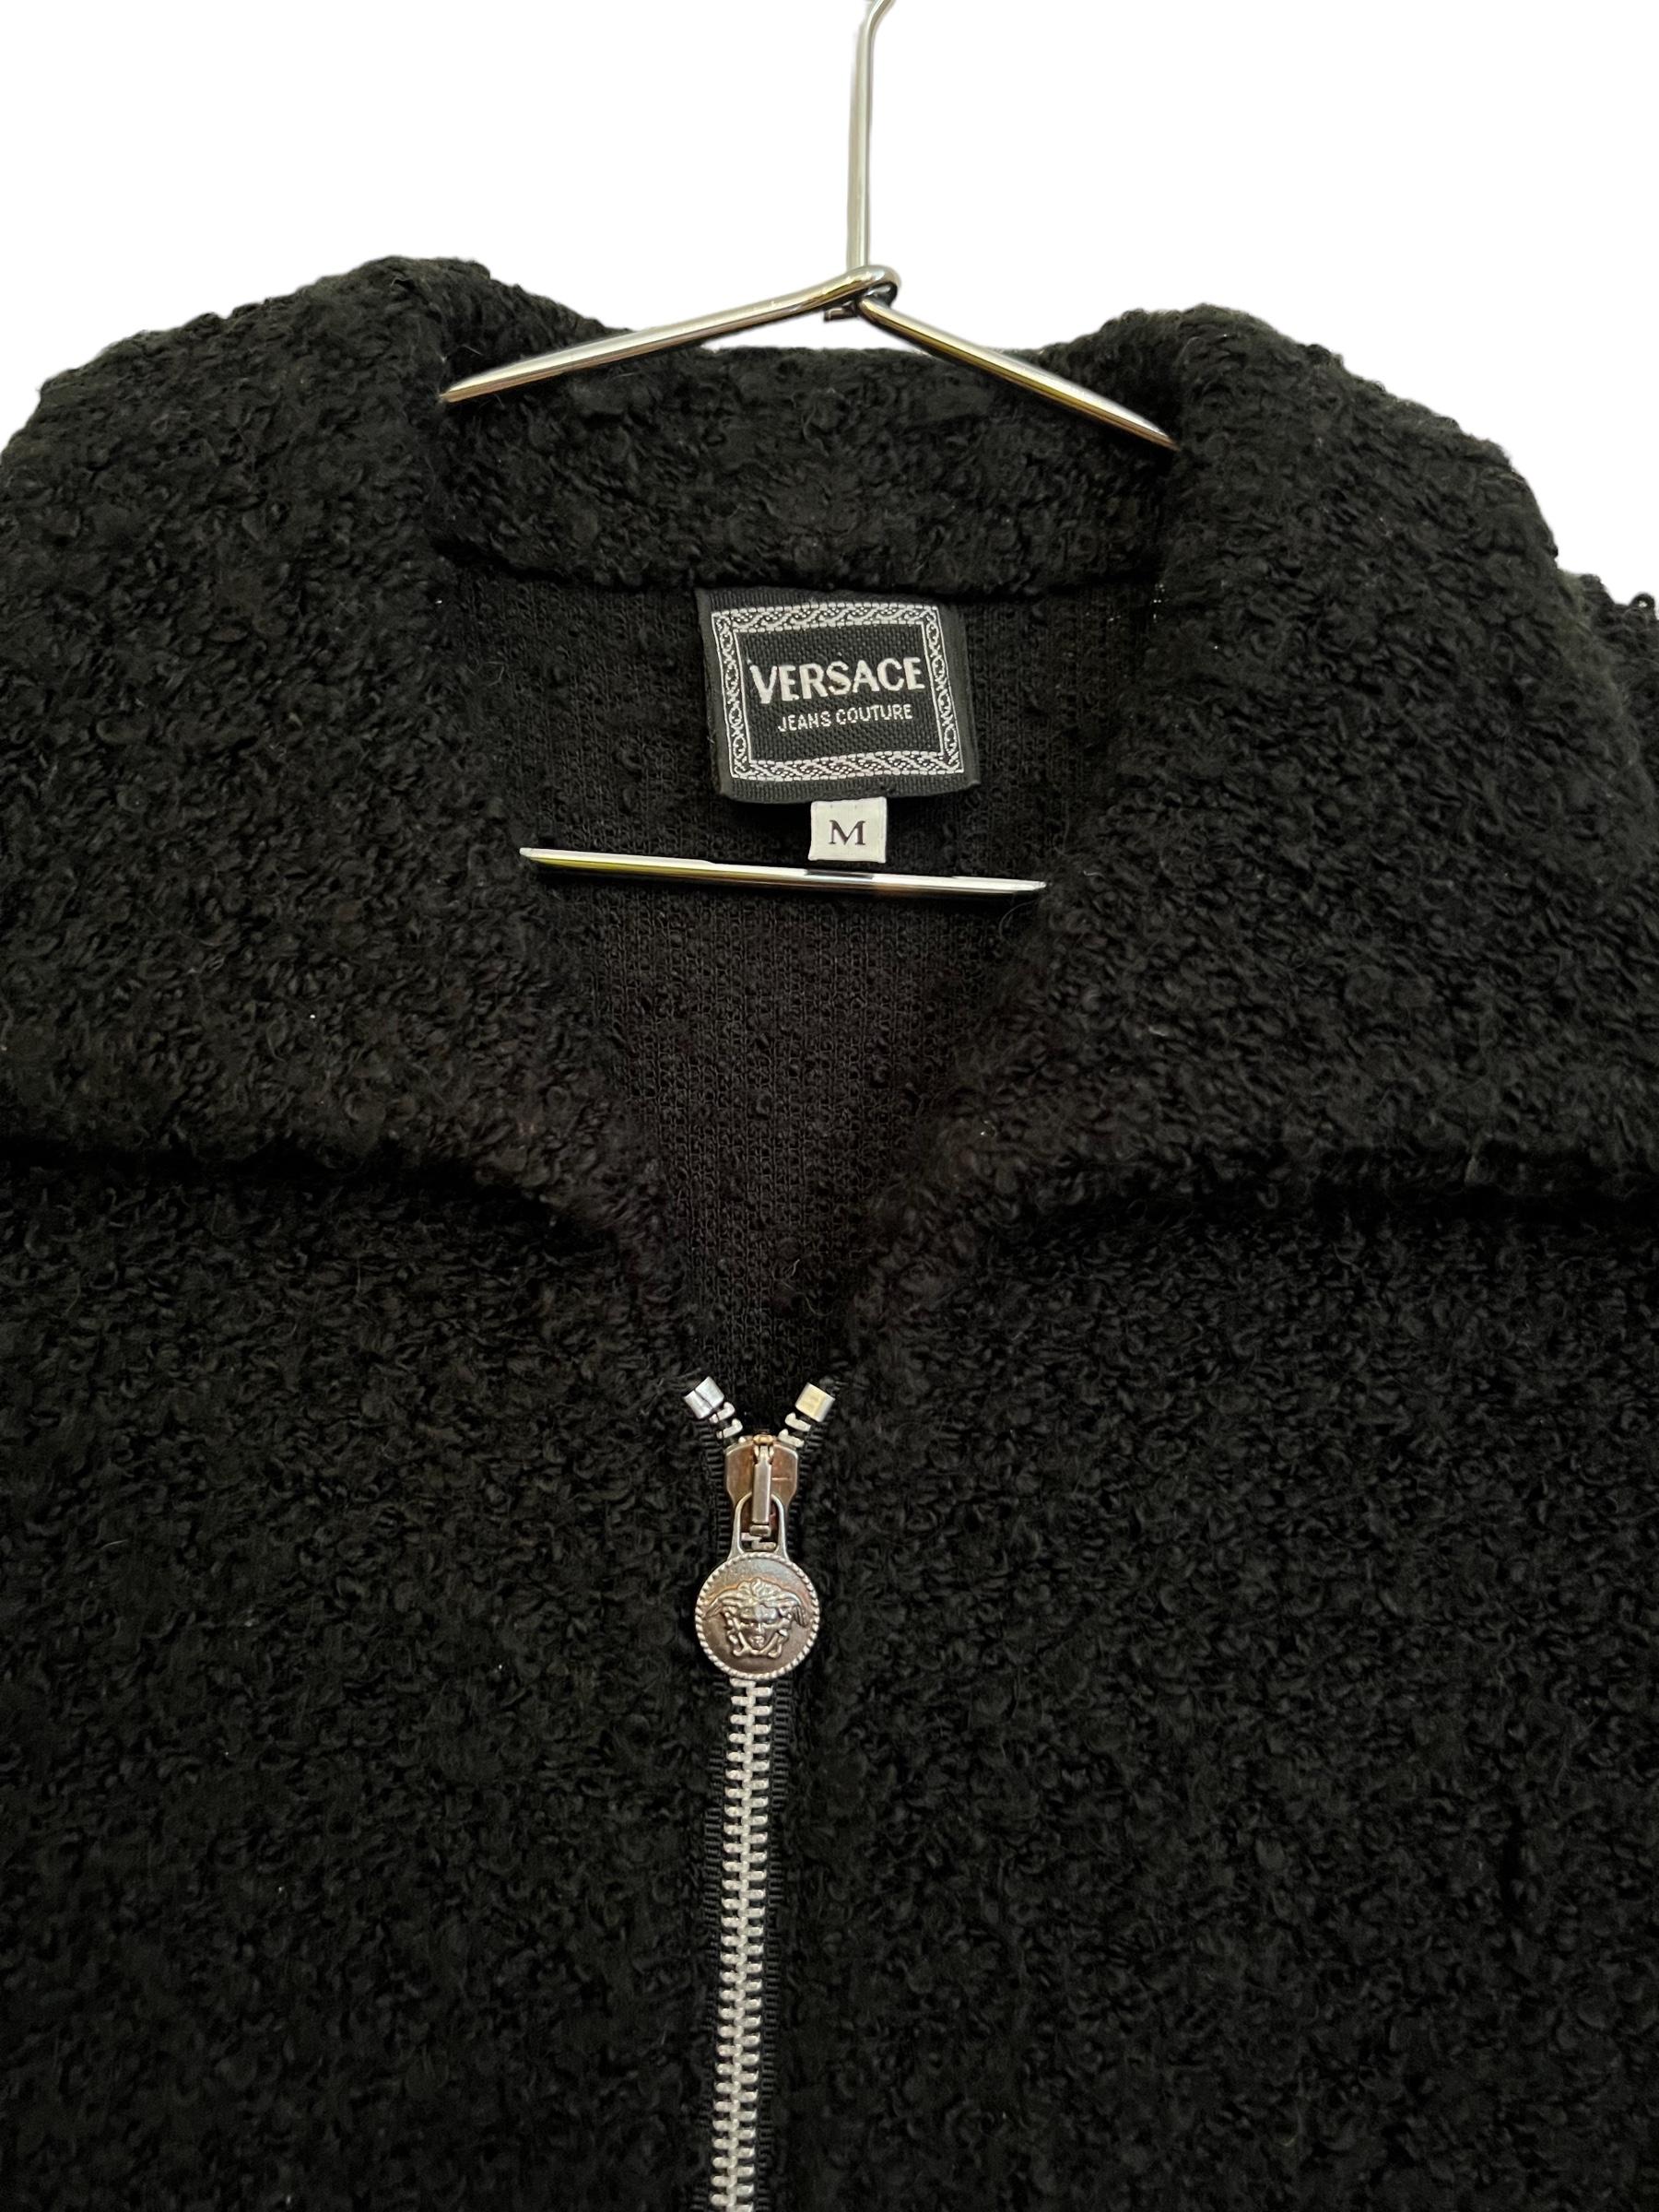 Chic Vintage early 1990's Versace Jeans Couture Cropped Cardigan, in a Fuzzy black textured material with silver metal hardware and iconic Medusa details.

Features: 
Zip down front
waist pockets 
Long Sleeves
Piece N0* 490631
Japanese